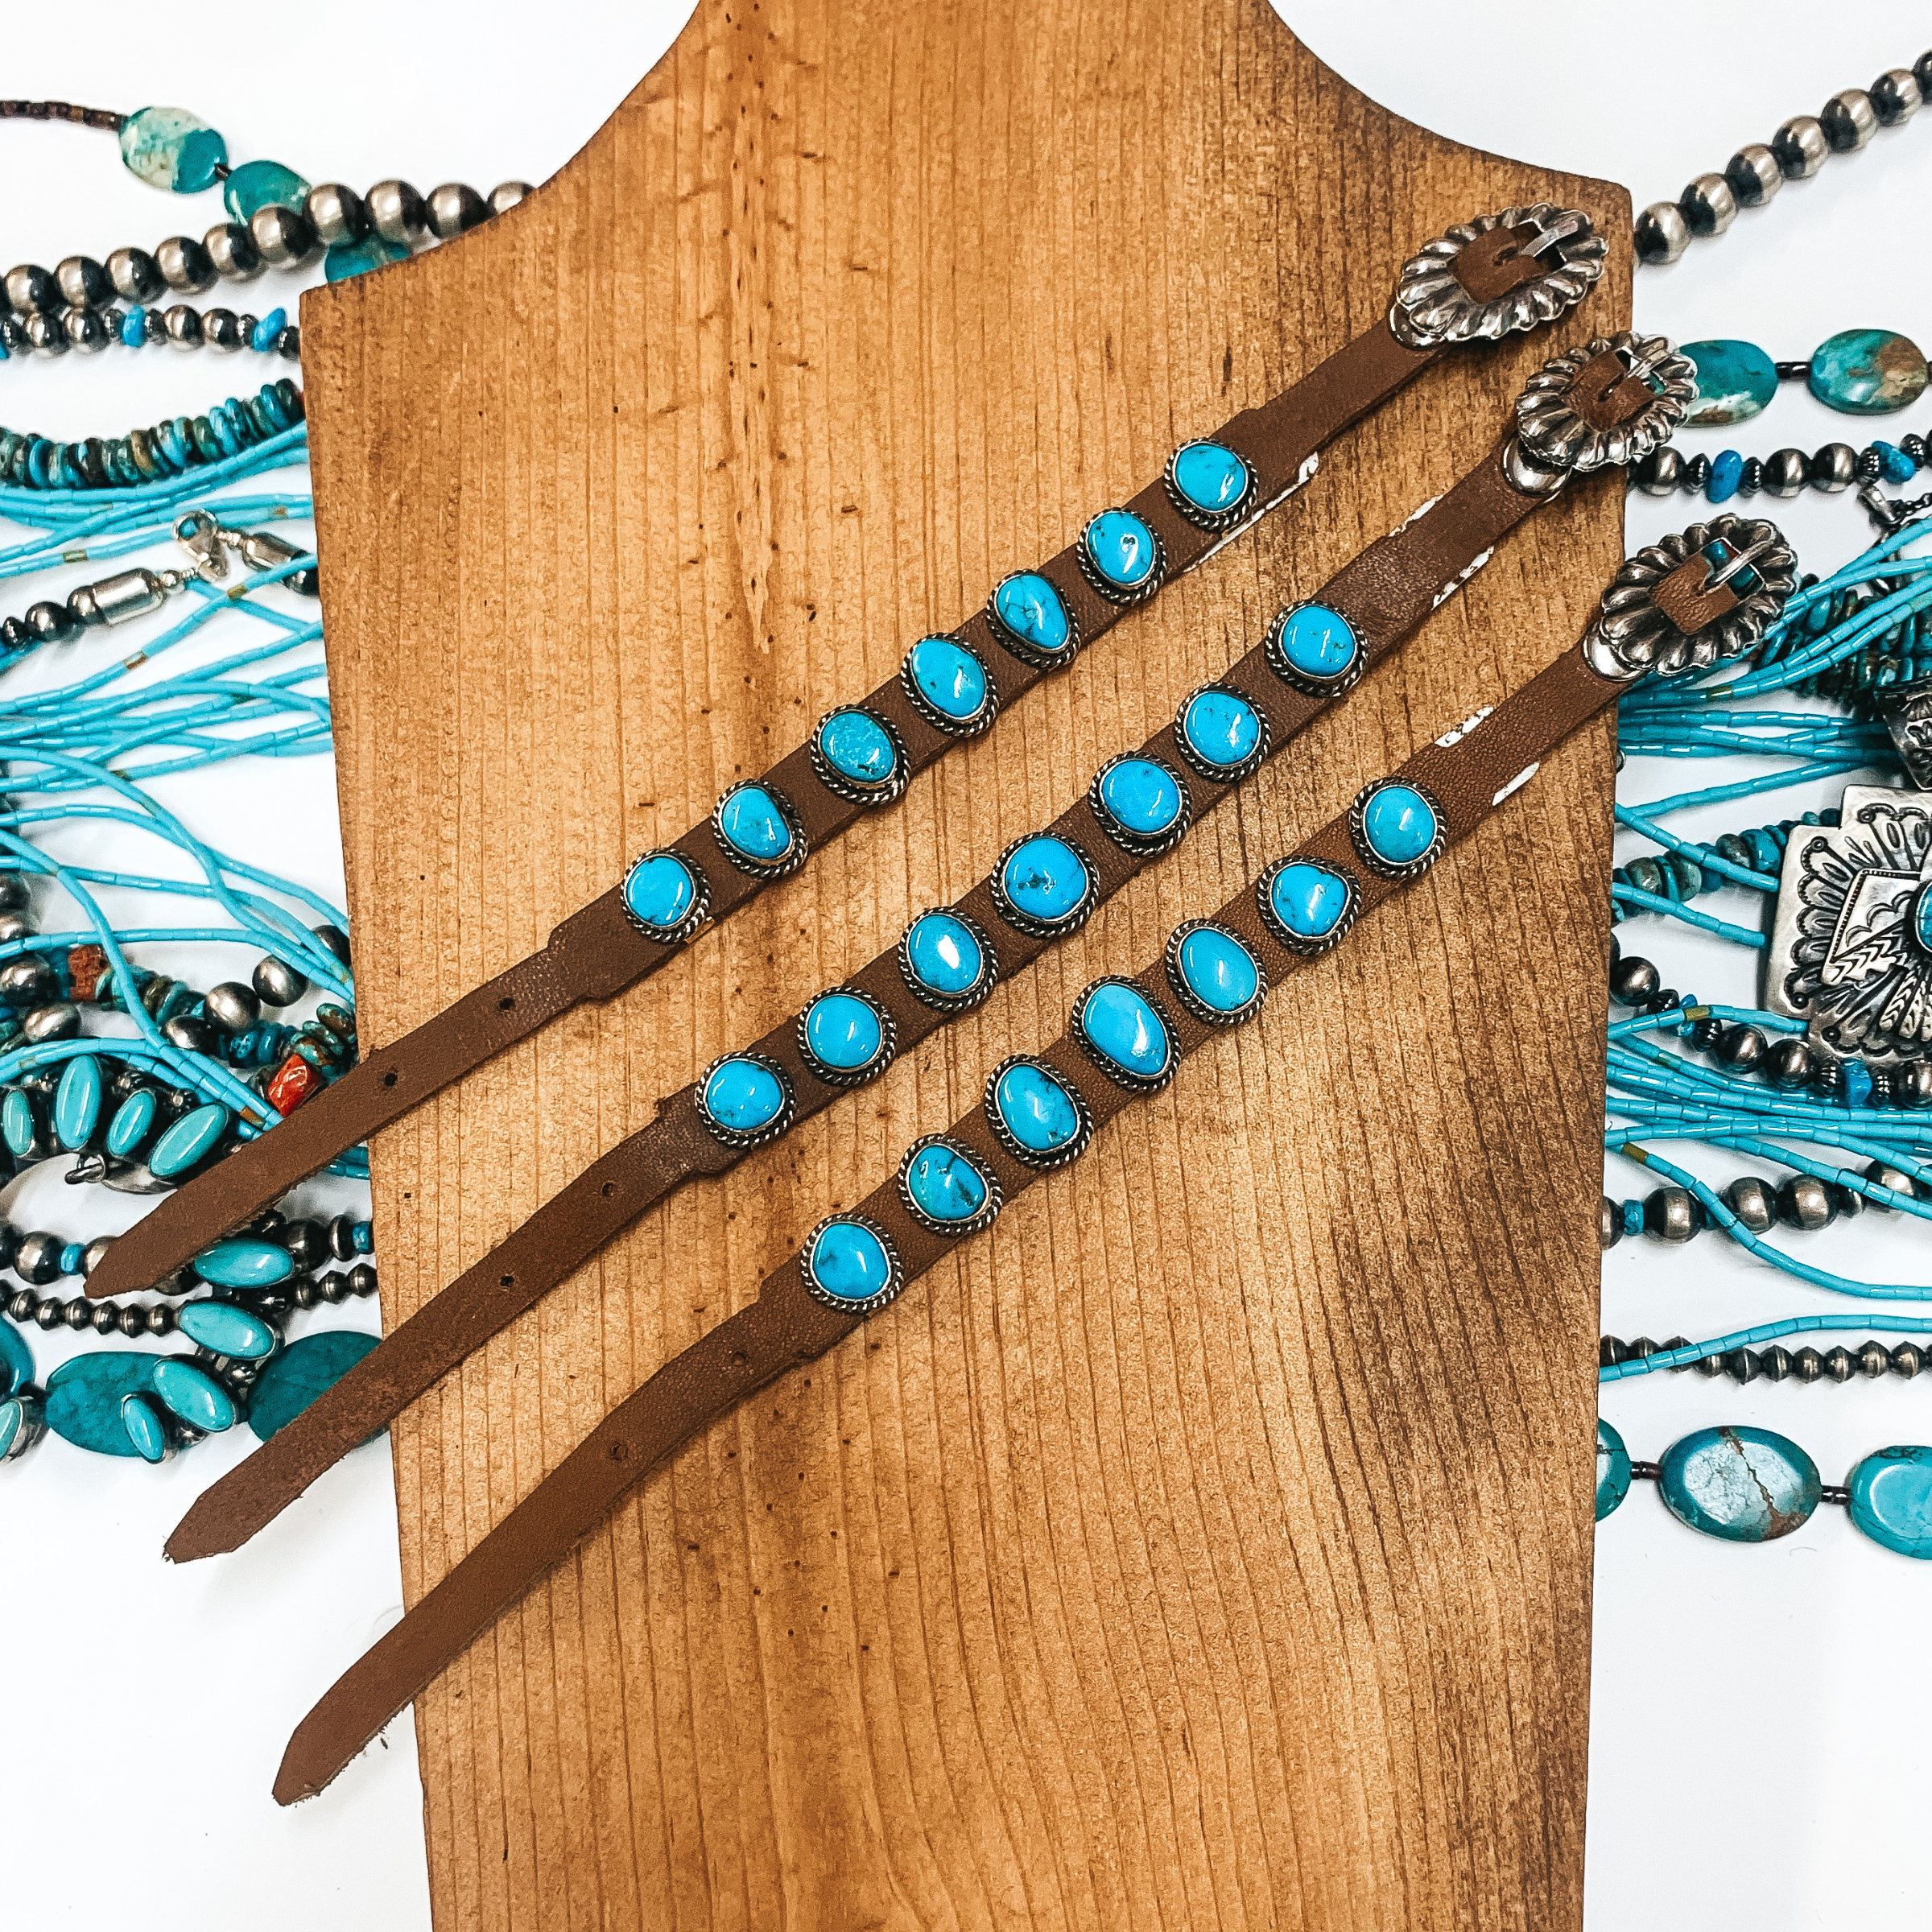 Julian Etcitty | Navajo Handmade Genuine Leather and Sterling Silver Buckle Bracelet with Seven Kingman Turquoise Stones - Giddy Up Glamour Boutique